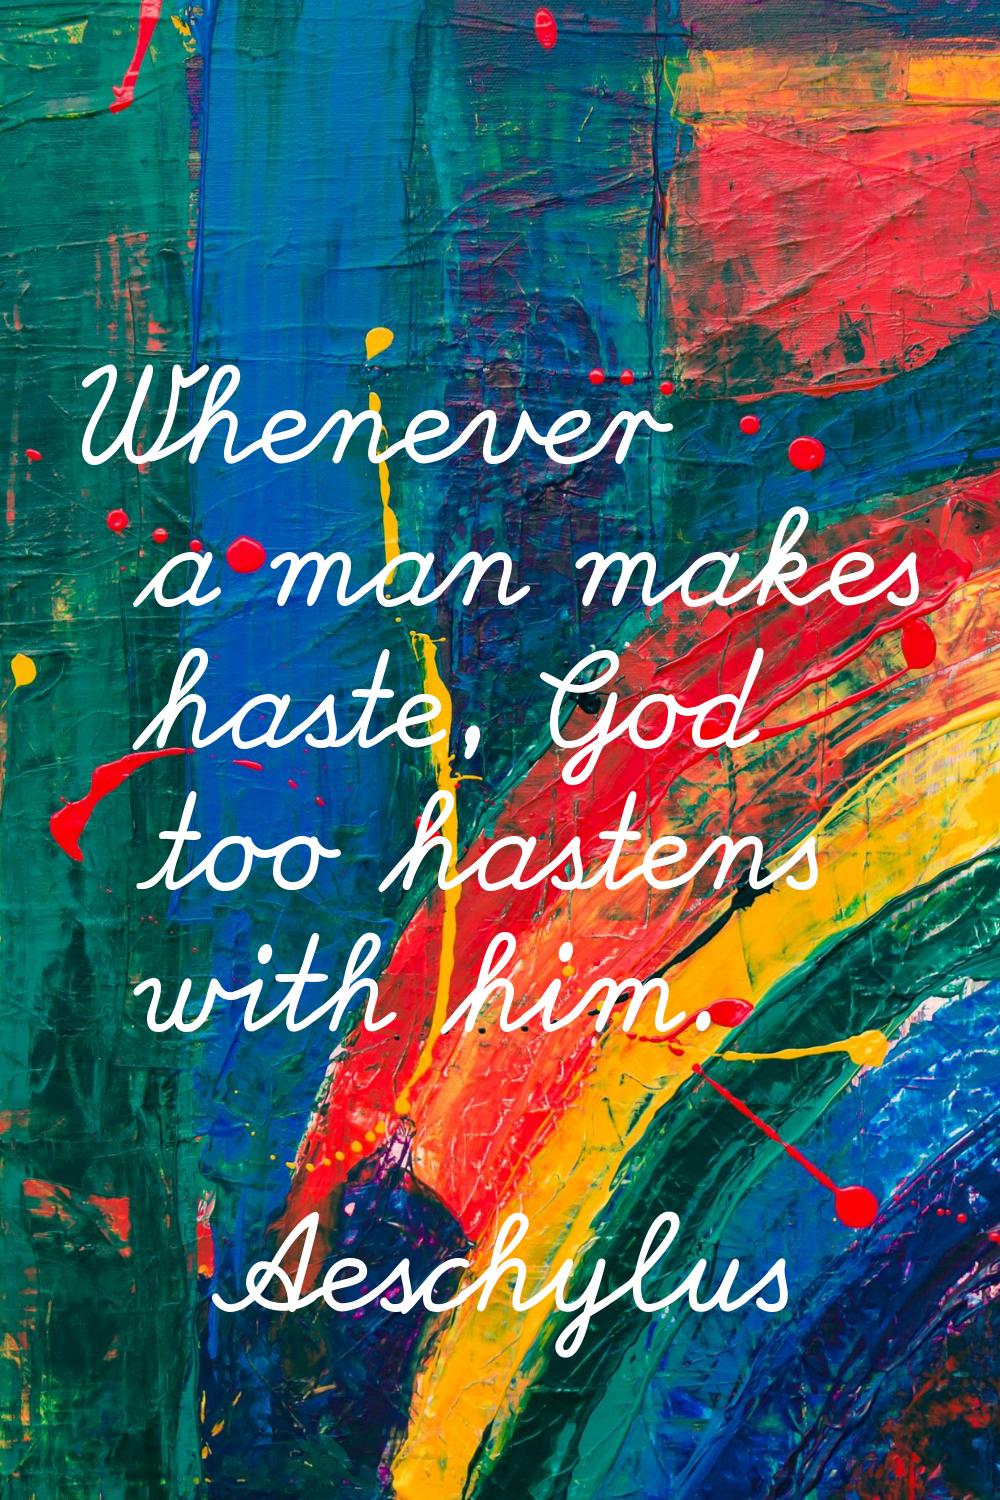 Whenever a man makes haste, God too hastens with him.